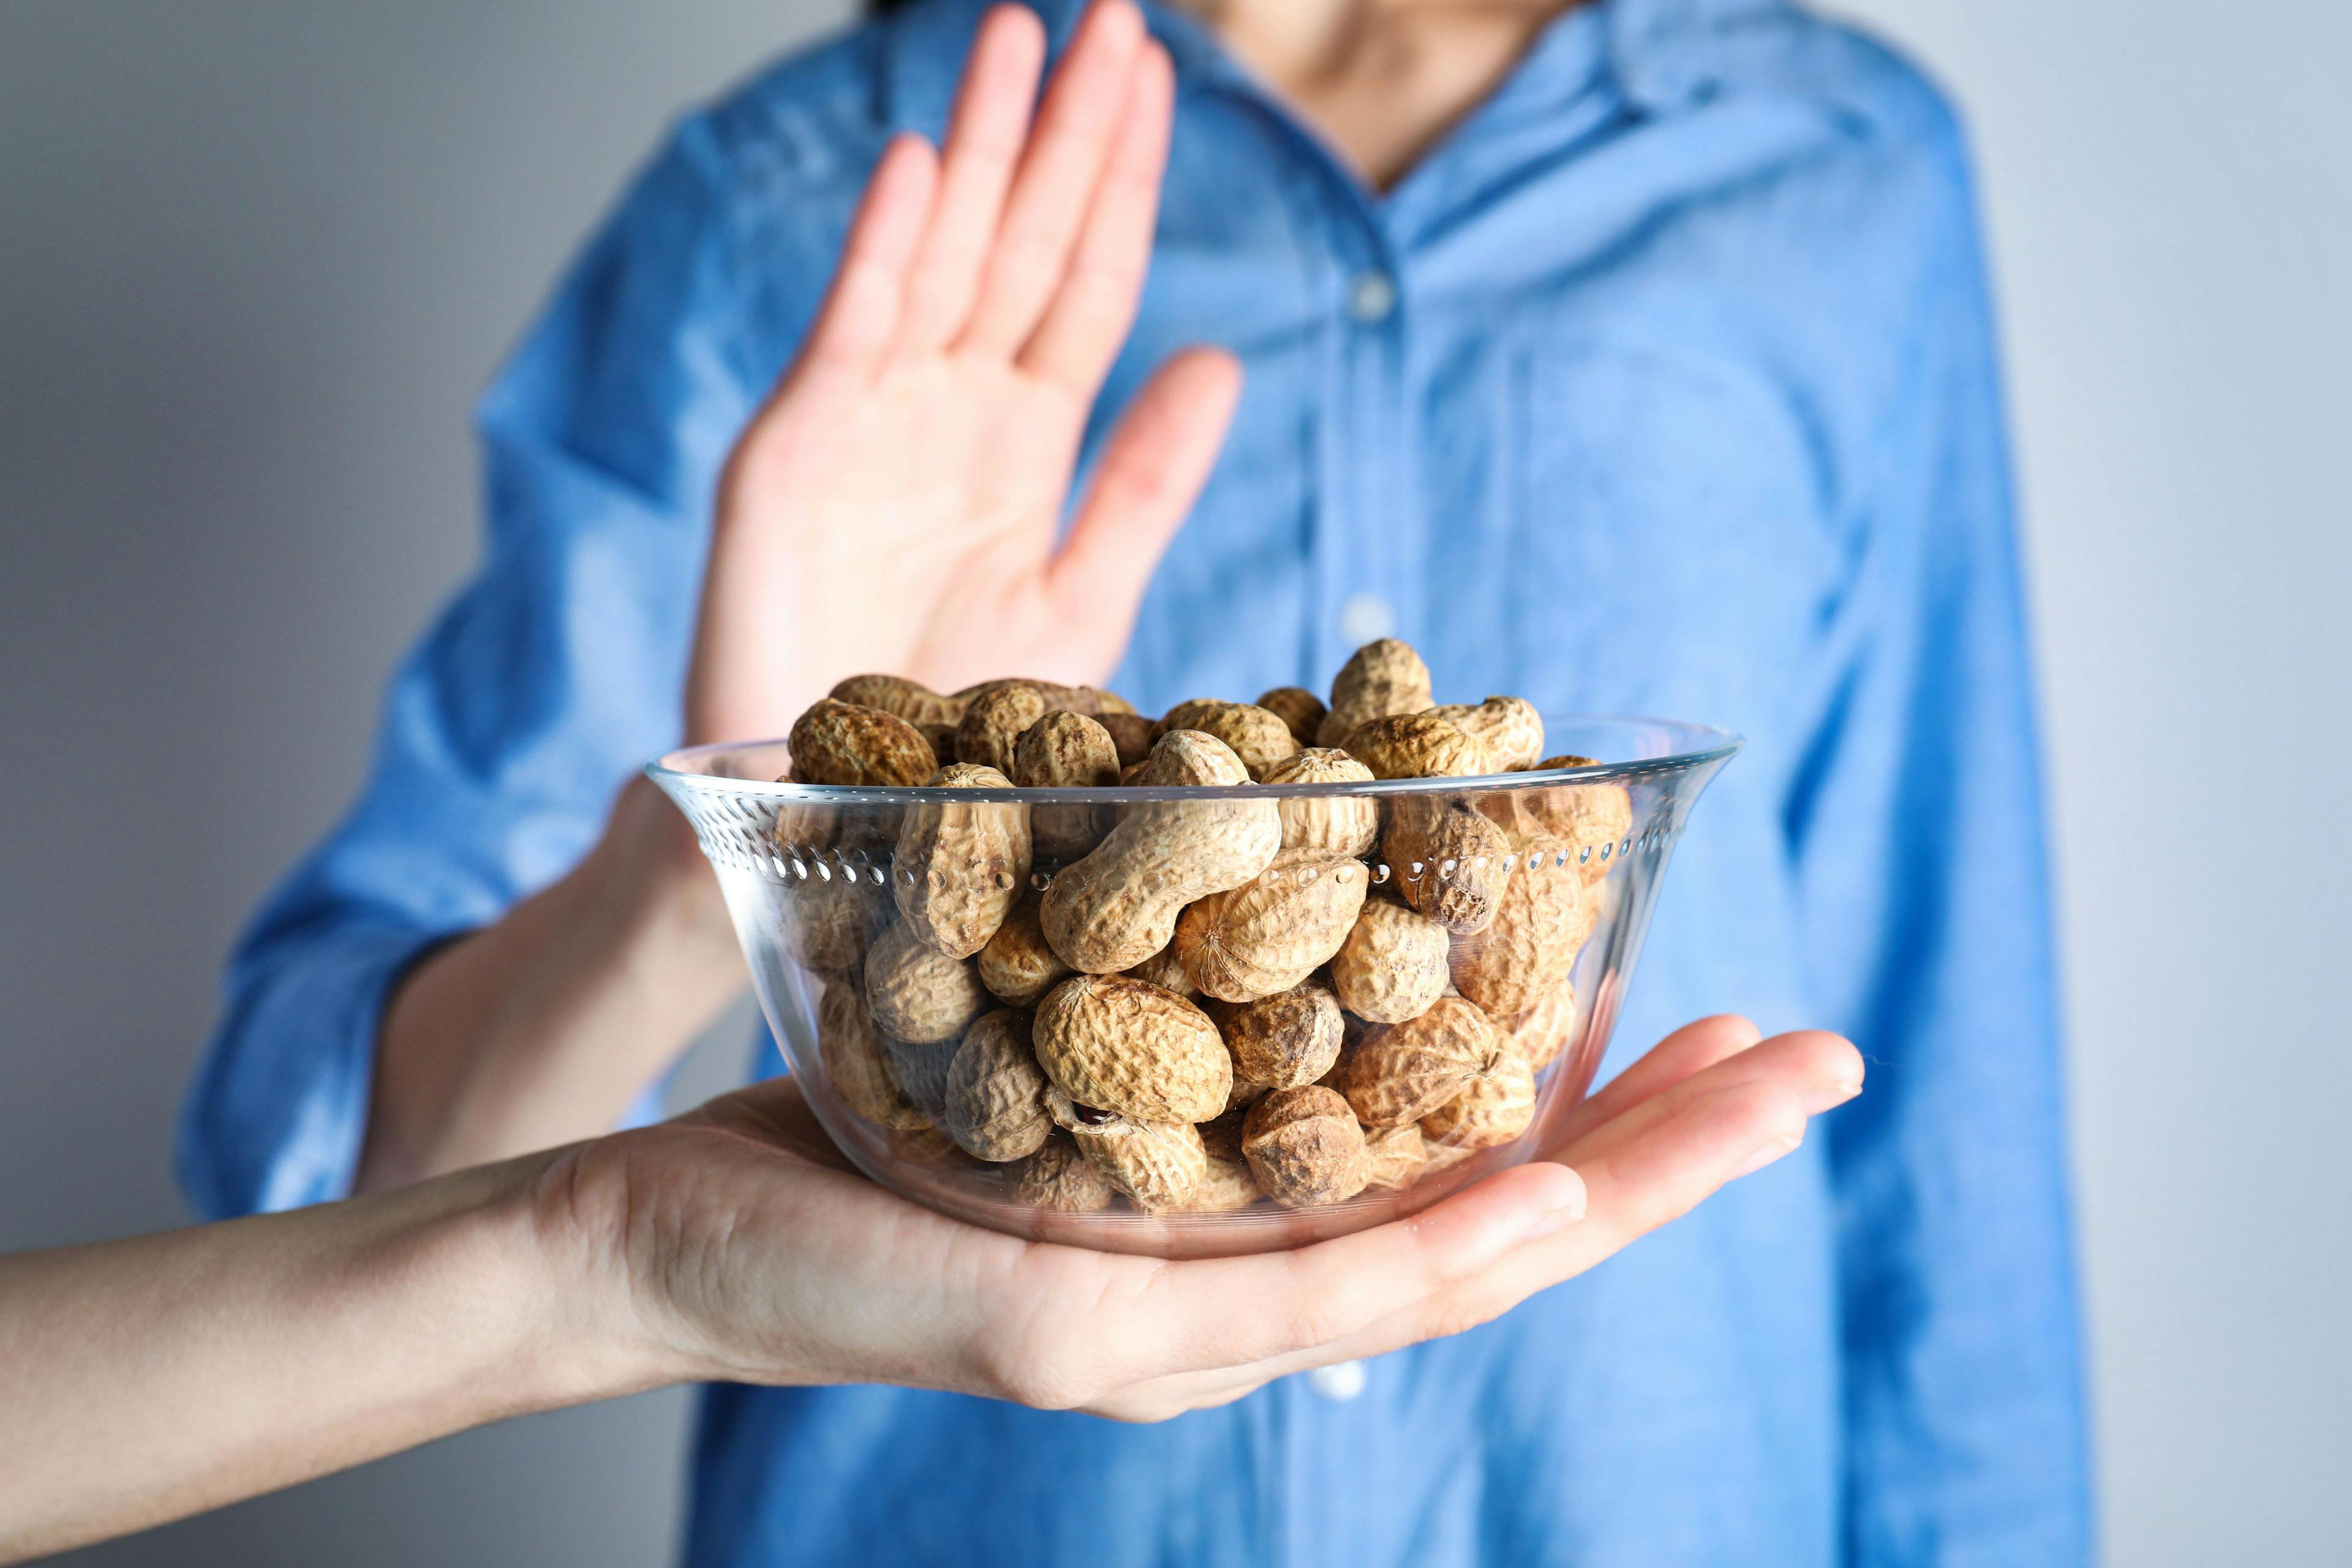 Woman refusing to eat peanuts, closeup. Food allergy concept | Image Credit: New Africa - stock.adobe.com